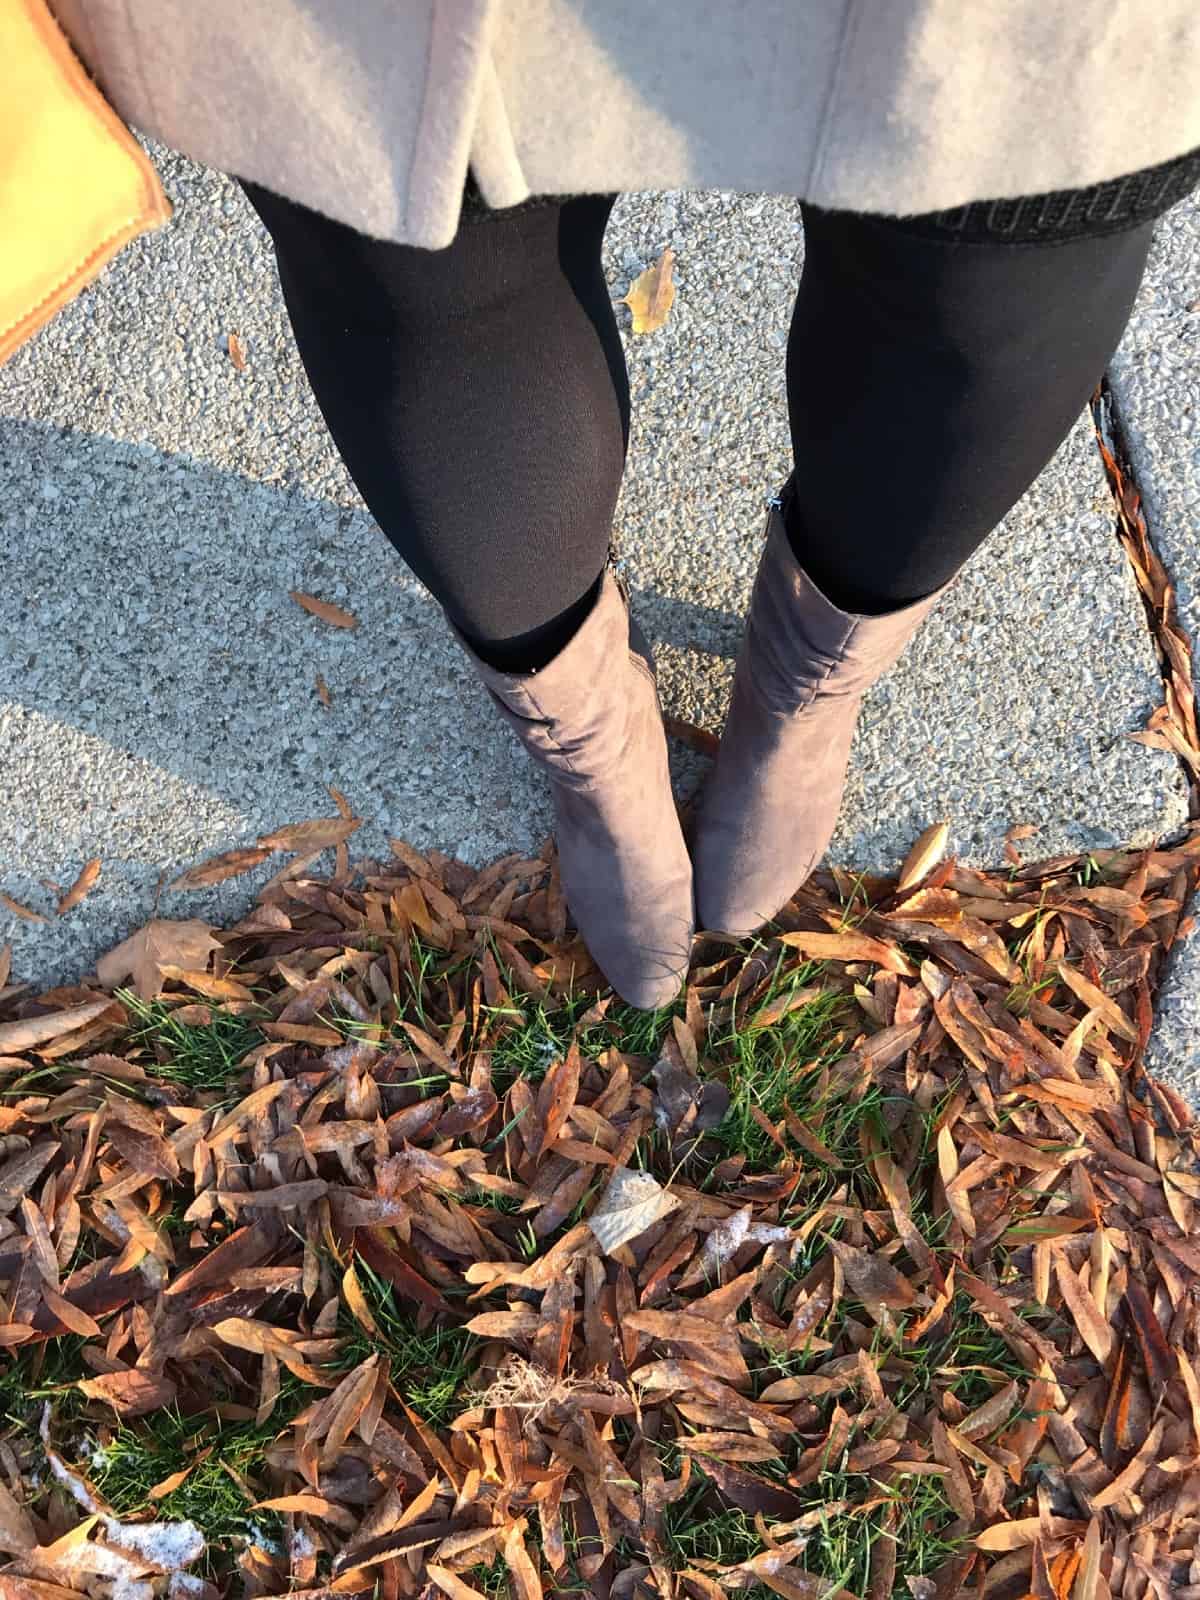 The Best Fleece-Lined Leggings for Winter Travel (and "Real Life") | Why fleece leggings are a gamechanger, the best fleece-lined leggings for cold weather. My favorite three pairs, including for looking cute and for working out, a must-have for Iceland in winter (or summer), Norway travel, Chicago in winter, and many other cold weather destinations. #leggings #coldweather #wintertravel #fleecelined #fleece #musthavetravelgear